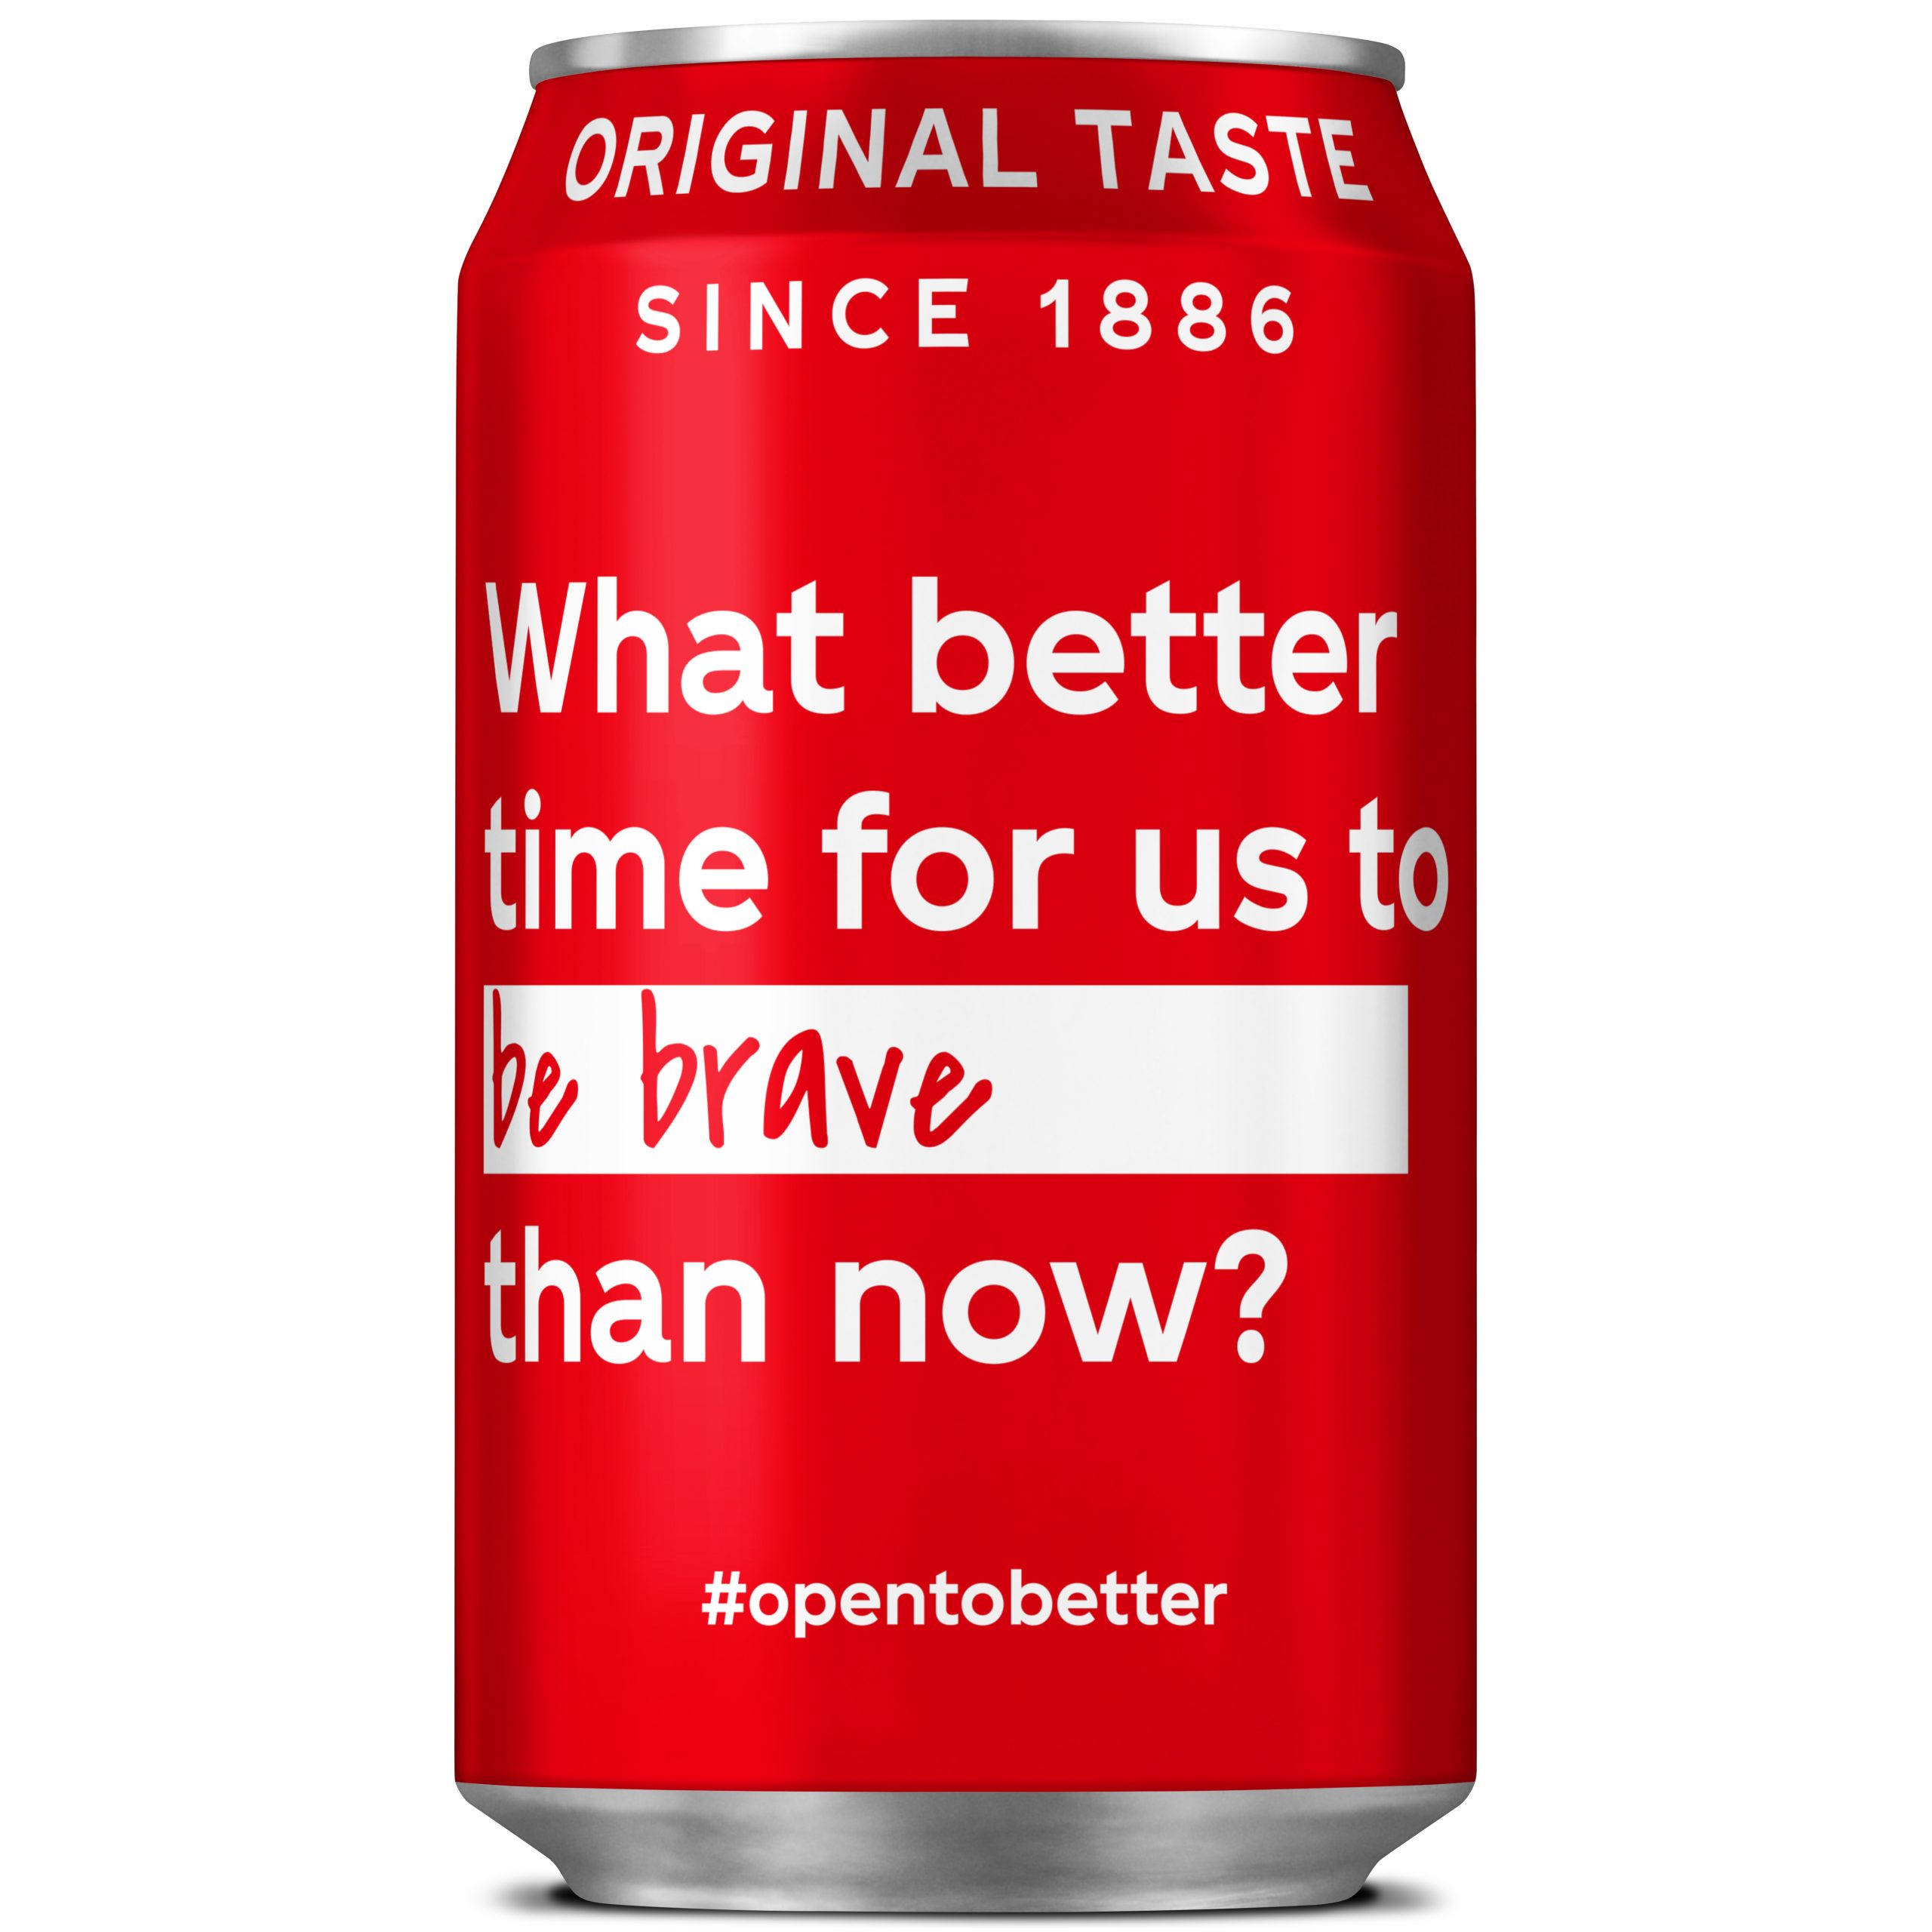 Coca-Cola (temporarily) replaces its iconic front-of-pack logo